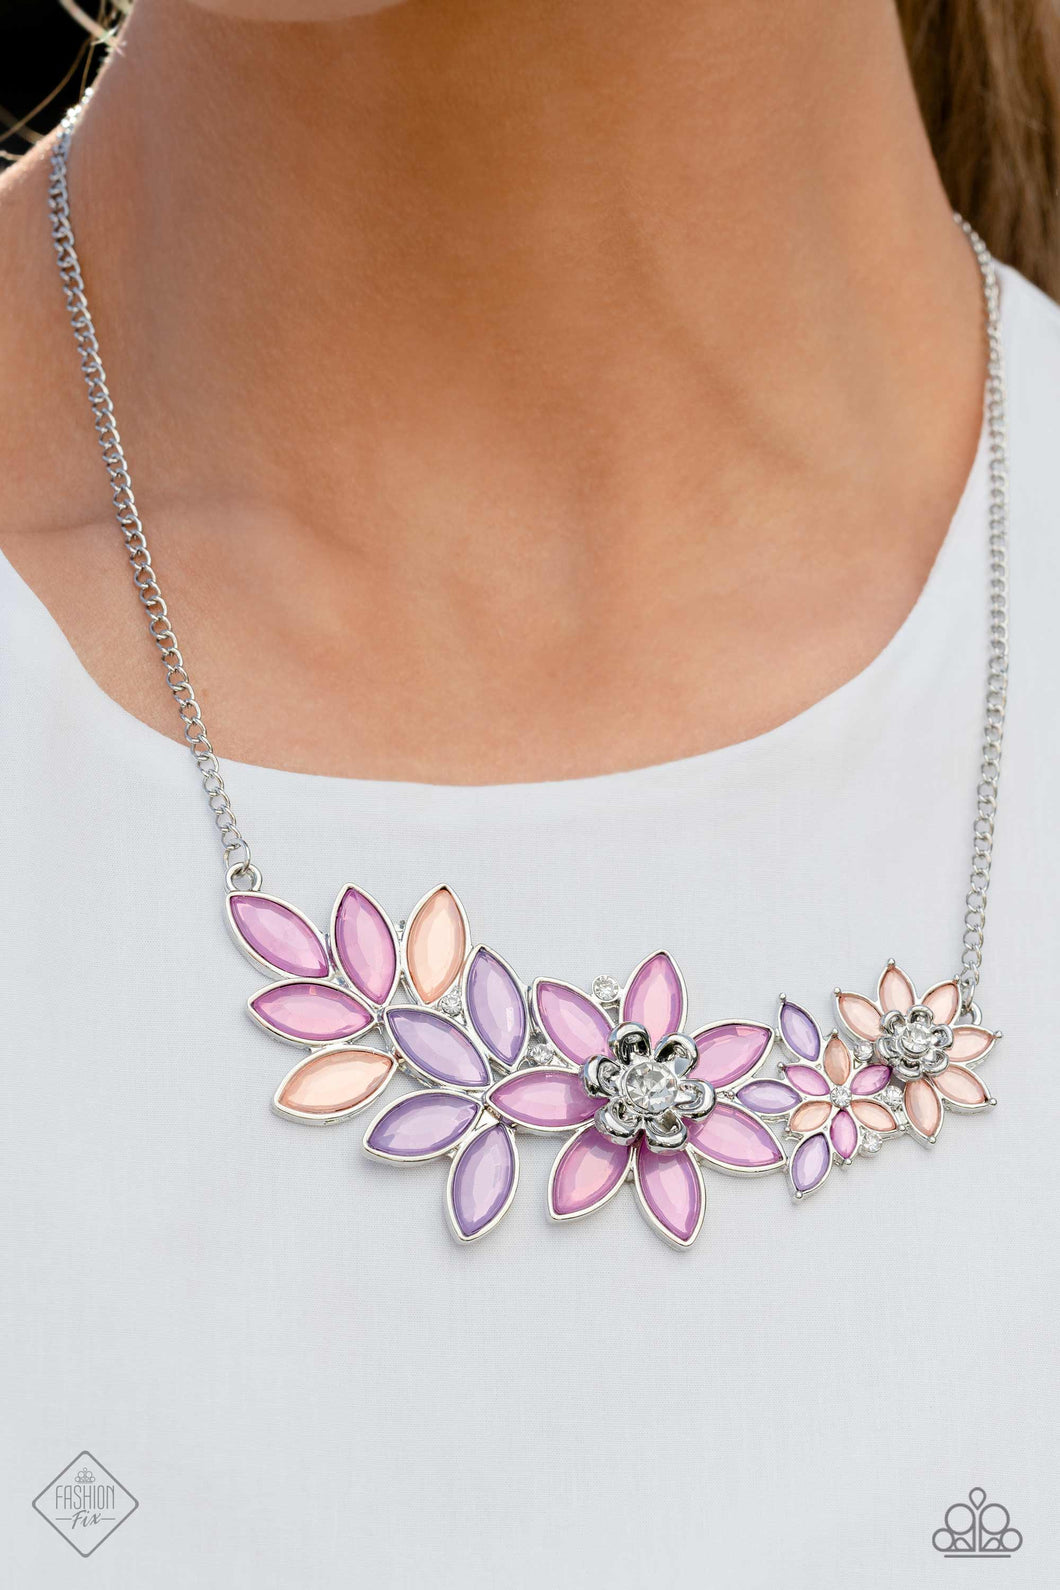 GARLAND Over Multi Petal Necklace Paparazzi $5 Jewelry. Get Free Shipping. #P2ST-MTXX-117NG